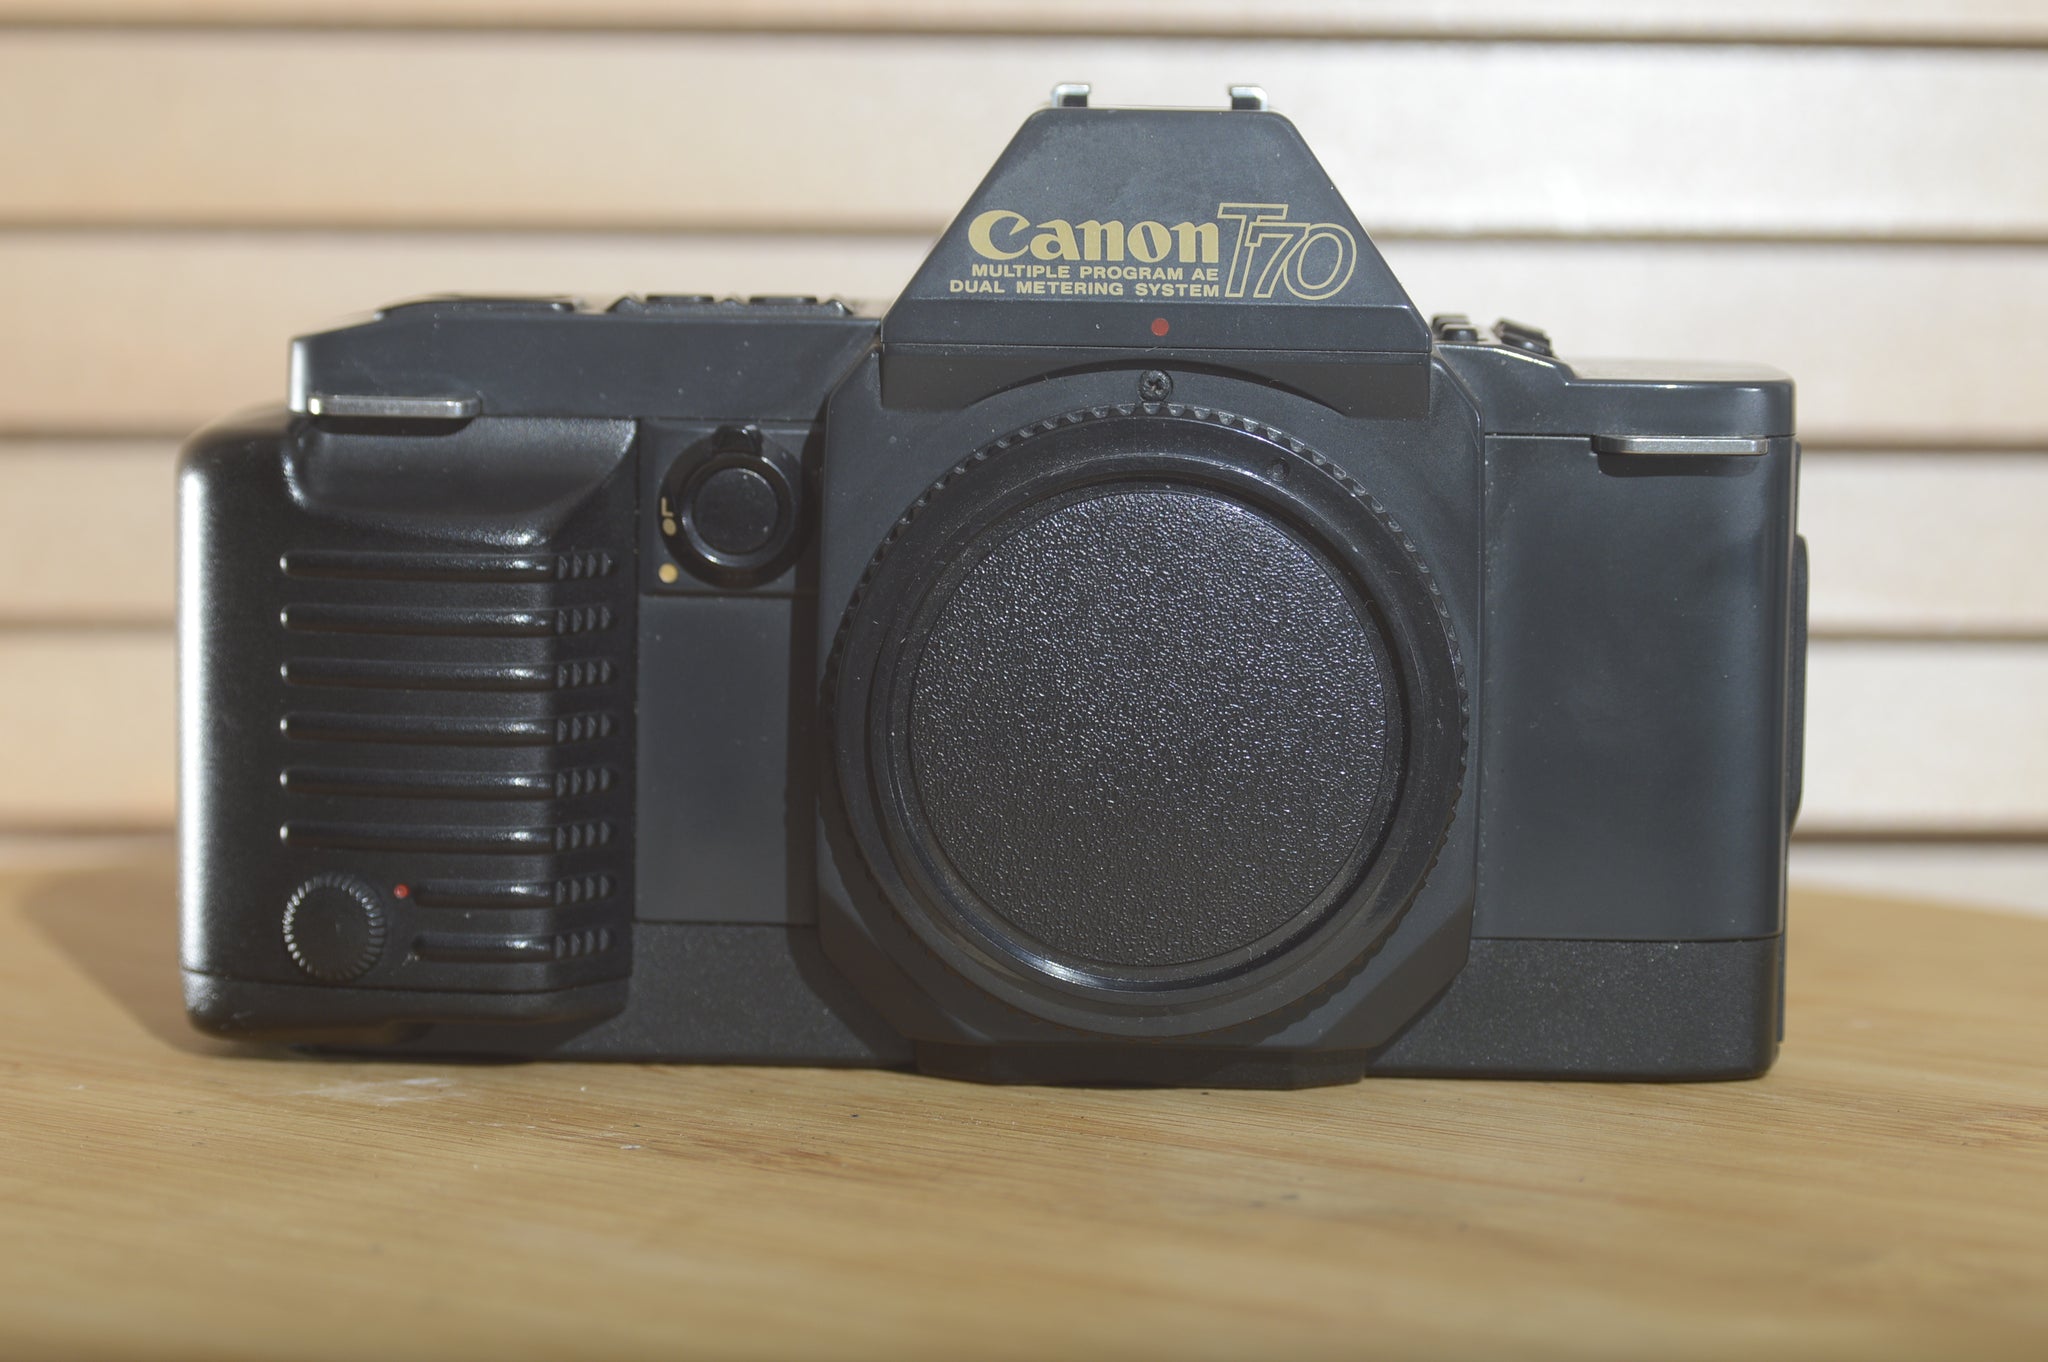 Canon T70 35mm SLR Camera. Brilliant condition. Great beginner camera - RewindCameras quality vintage cameras, fully tested and serviced